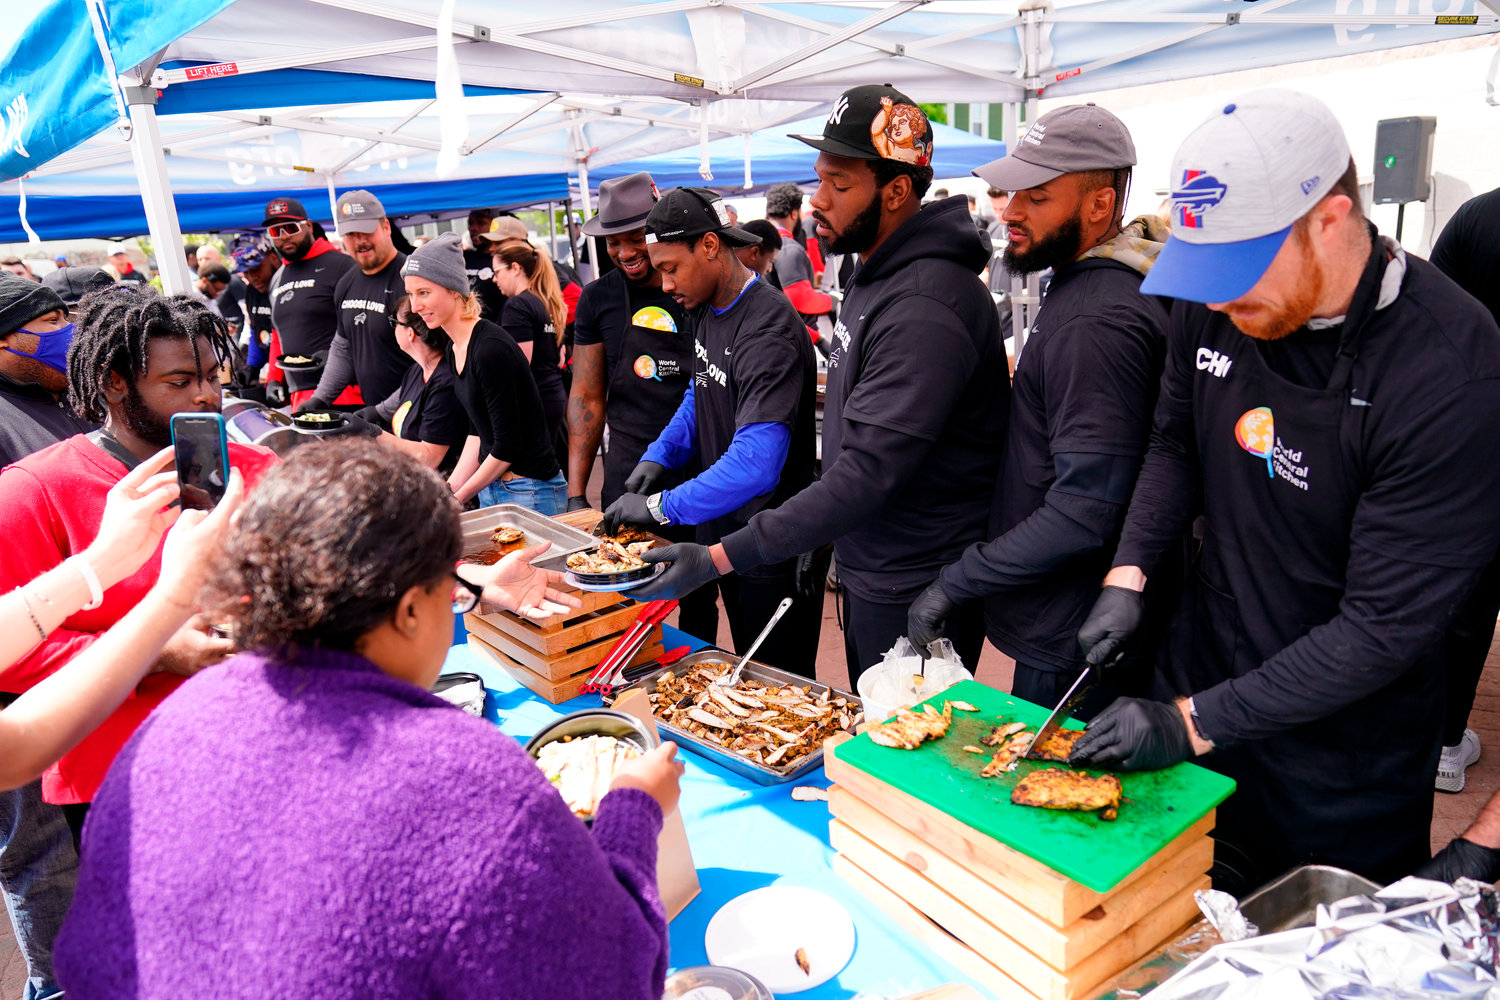 Buffalo Bills players serve food at a World Central Kitchen tent near the scene of Saturday's shooting at a supermarket, in Buffalo, N.Y., Wednesday, May 18, 2022. (AP Photo/Matt Rourke)